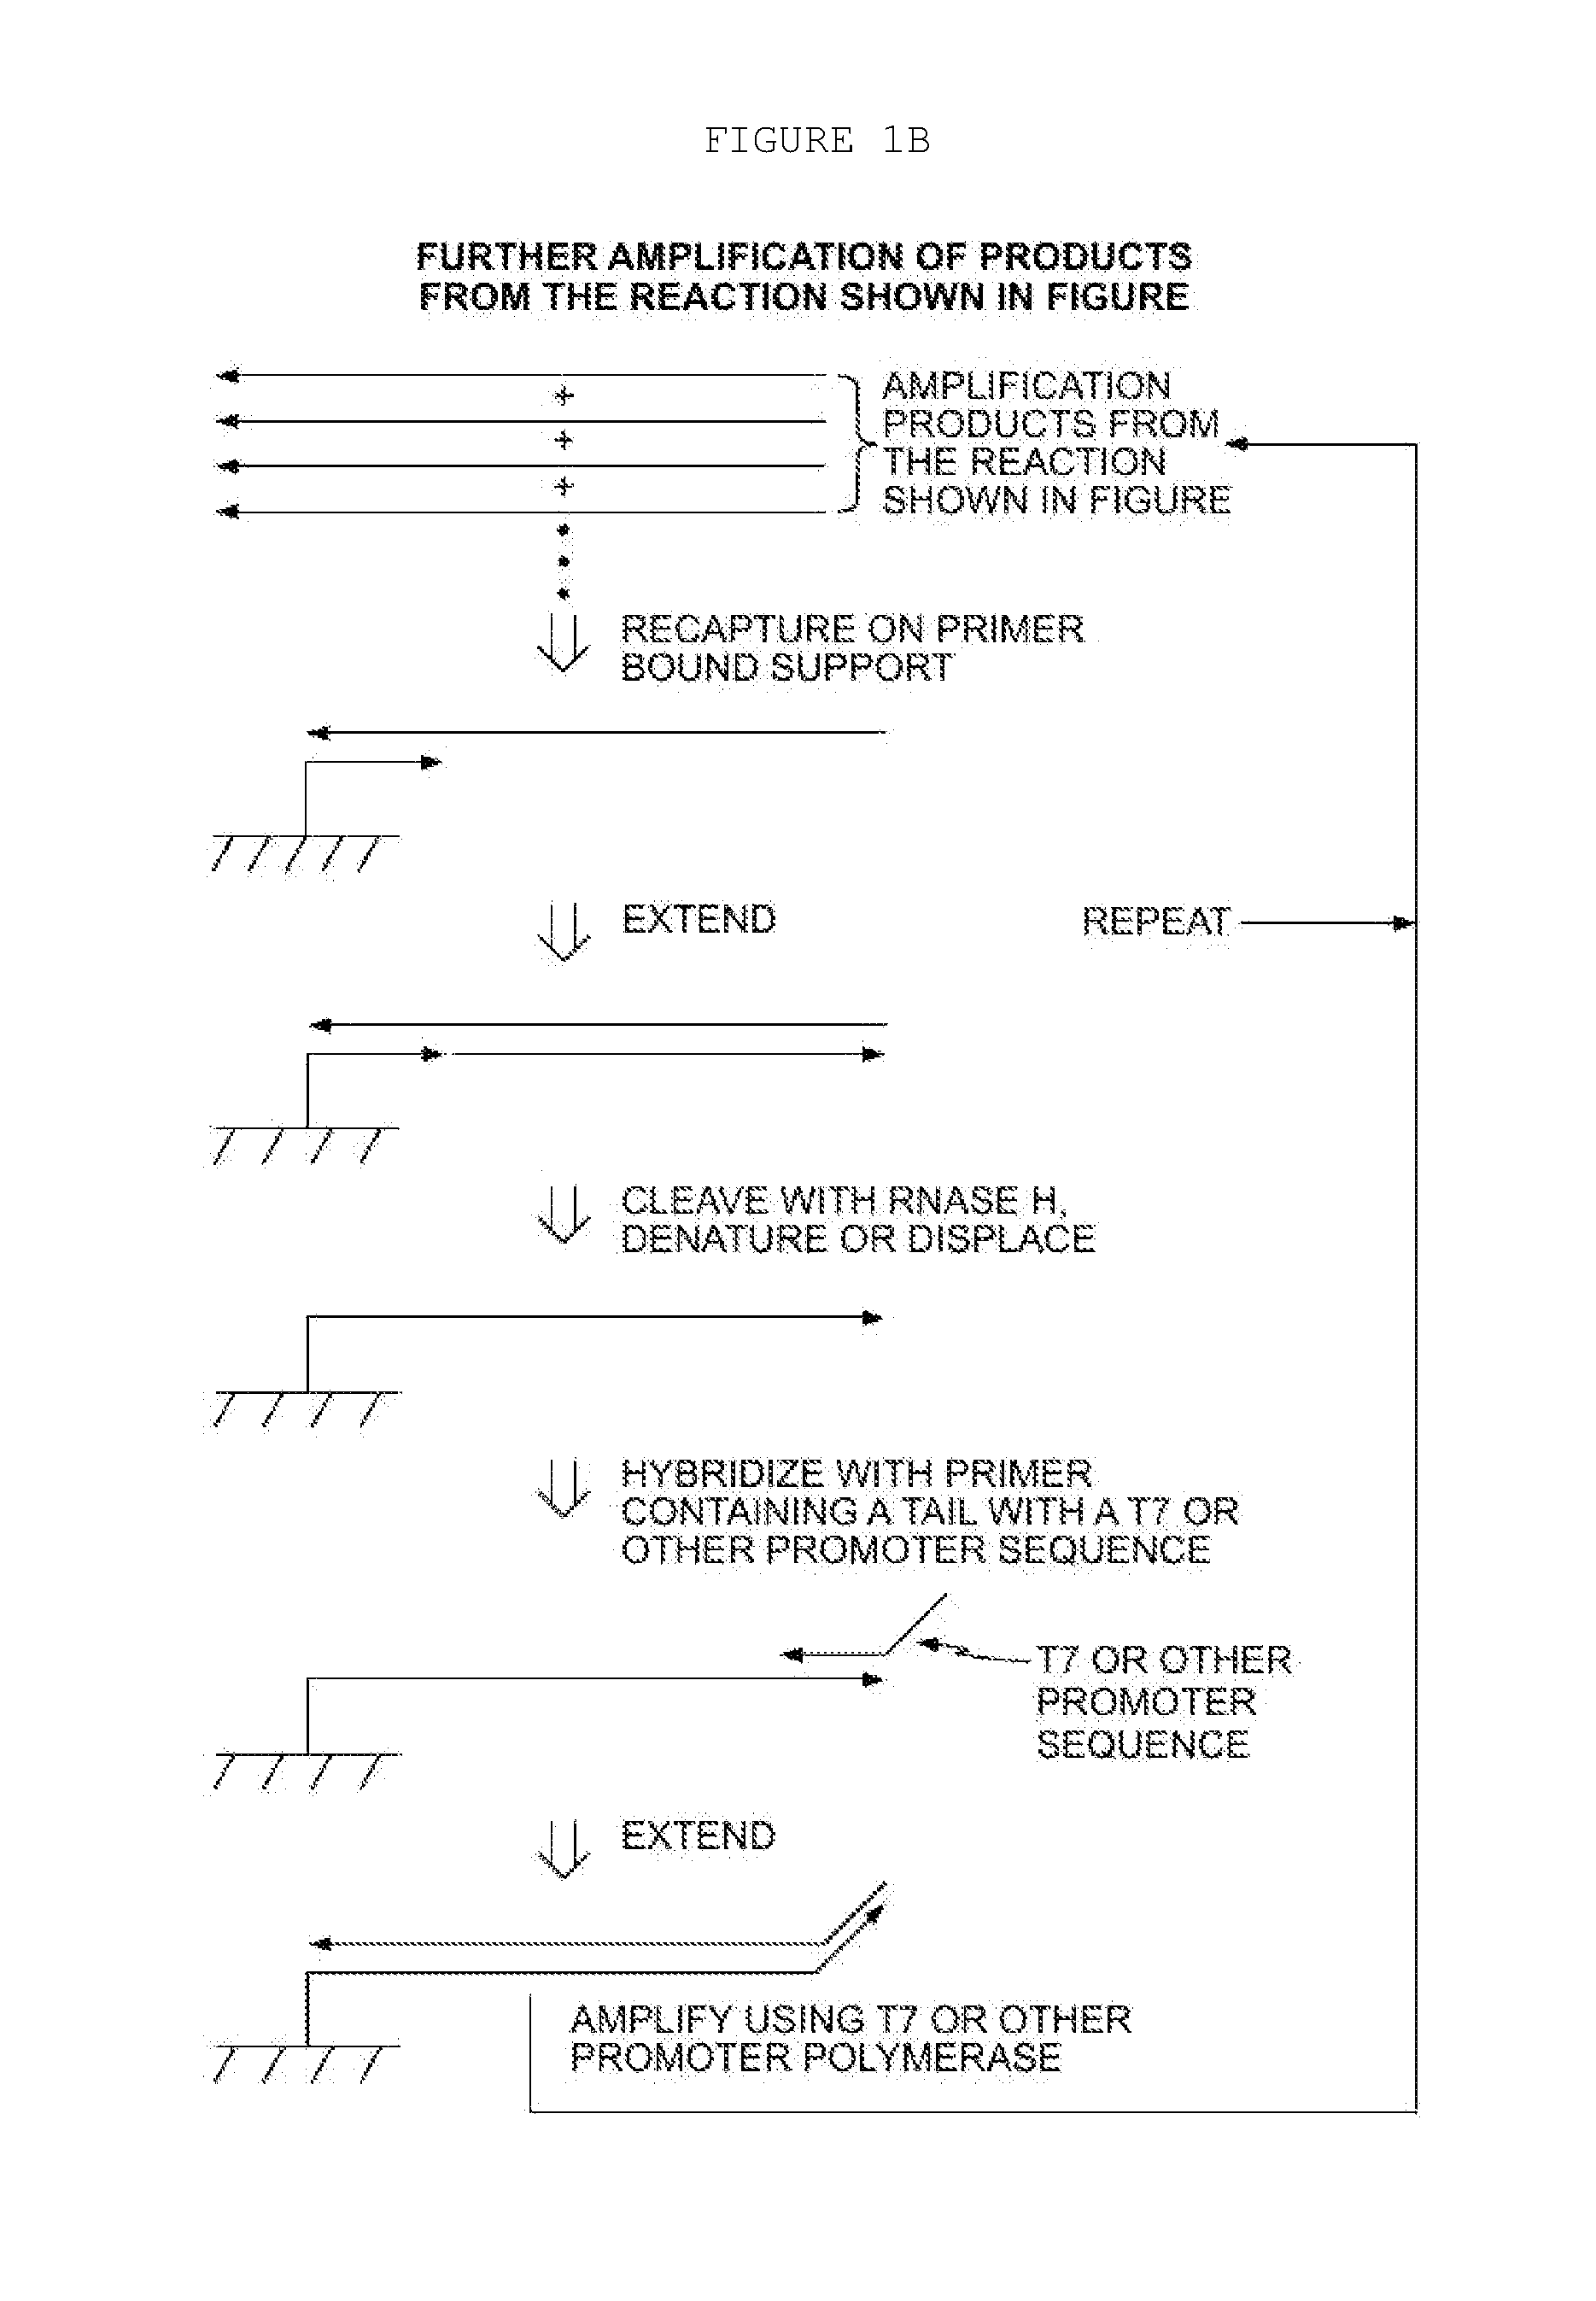 Methods for Amplification of Nucleic Acids on Solid Support